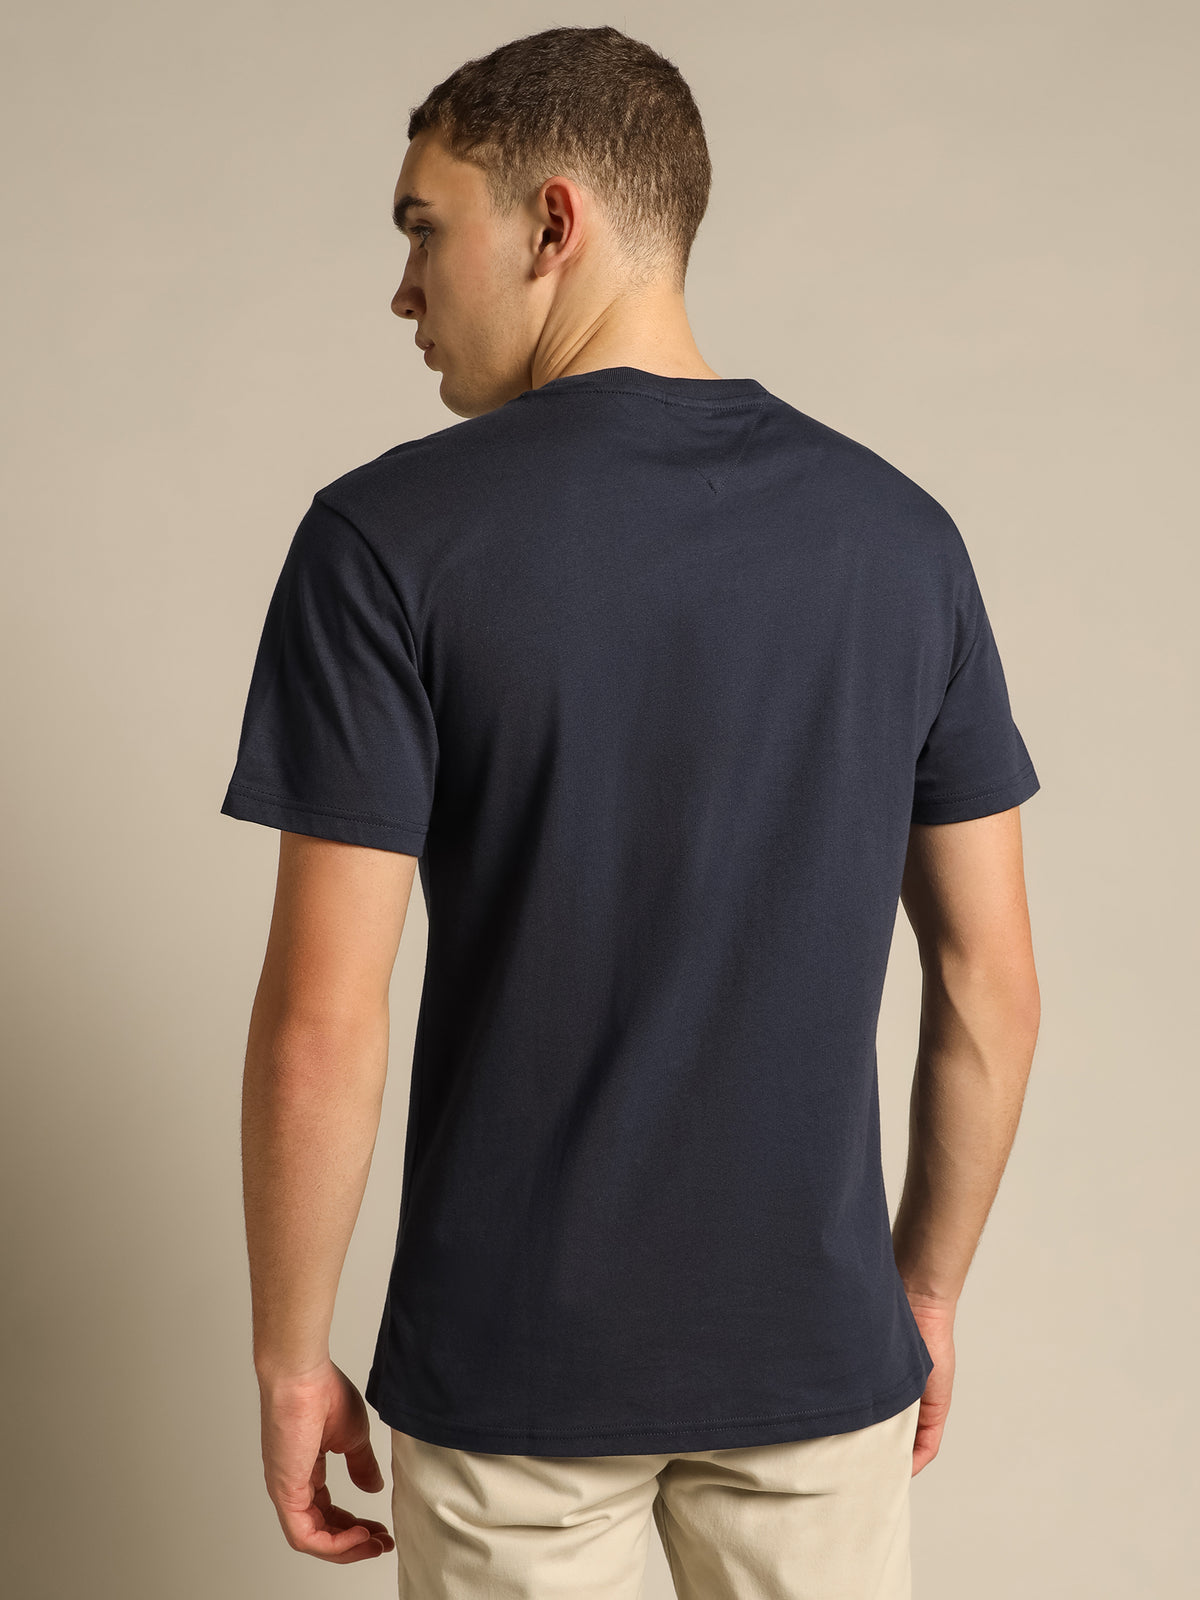 Small Text T-Shirt in Twilight Navy